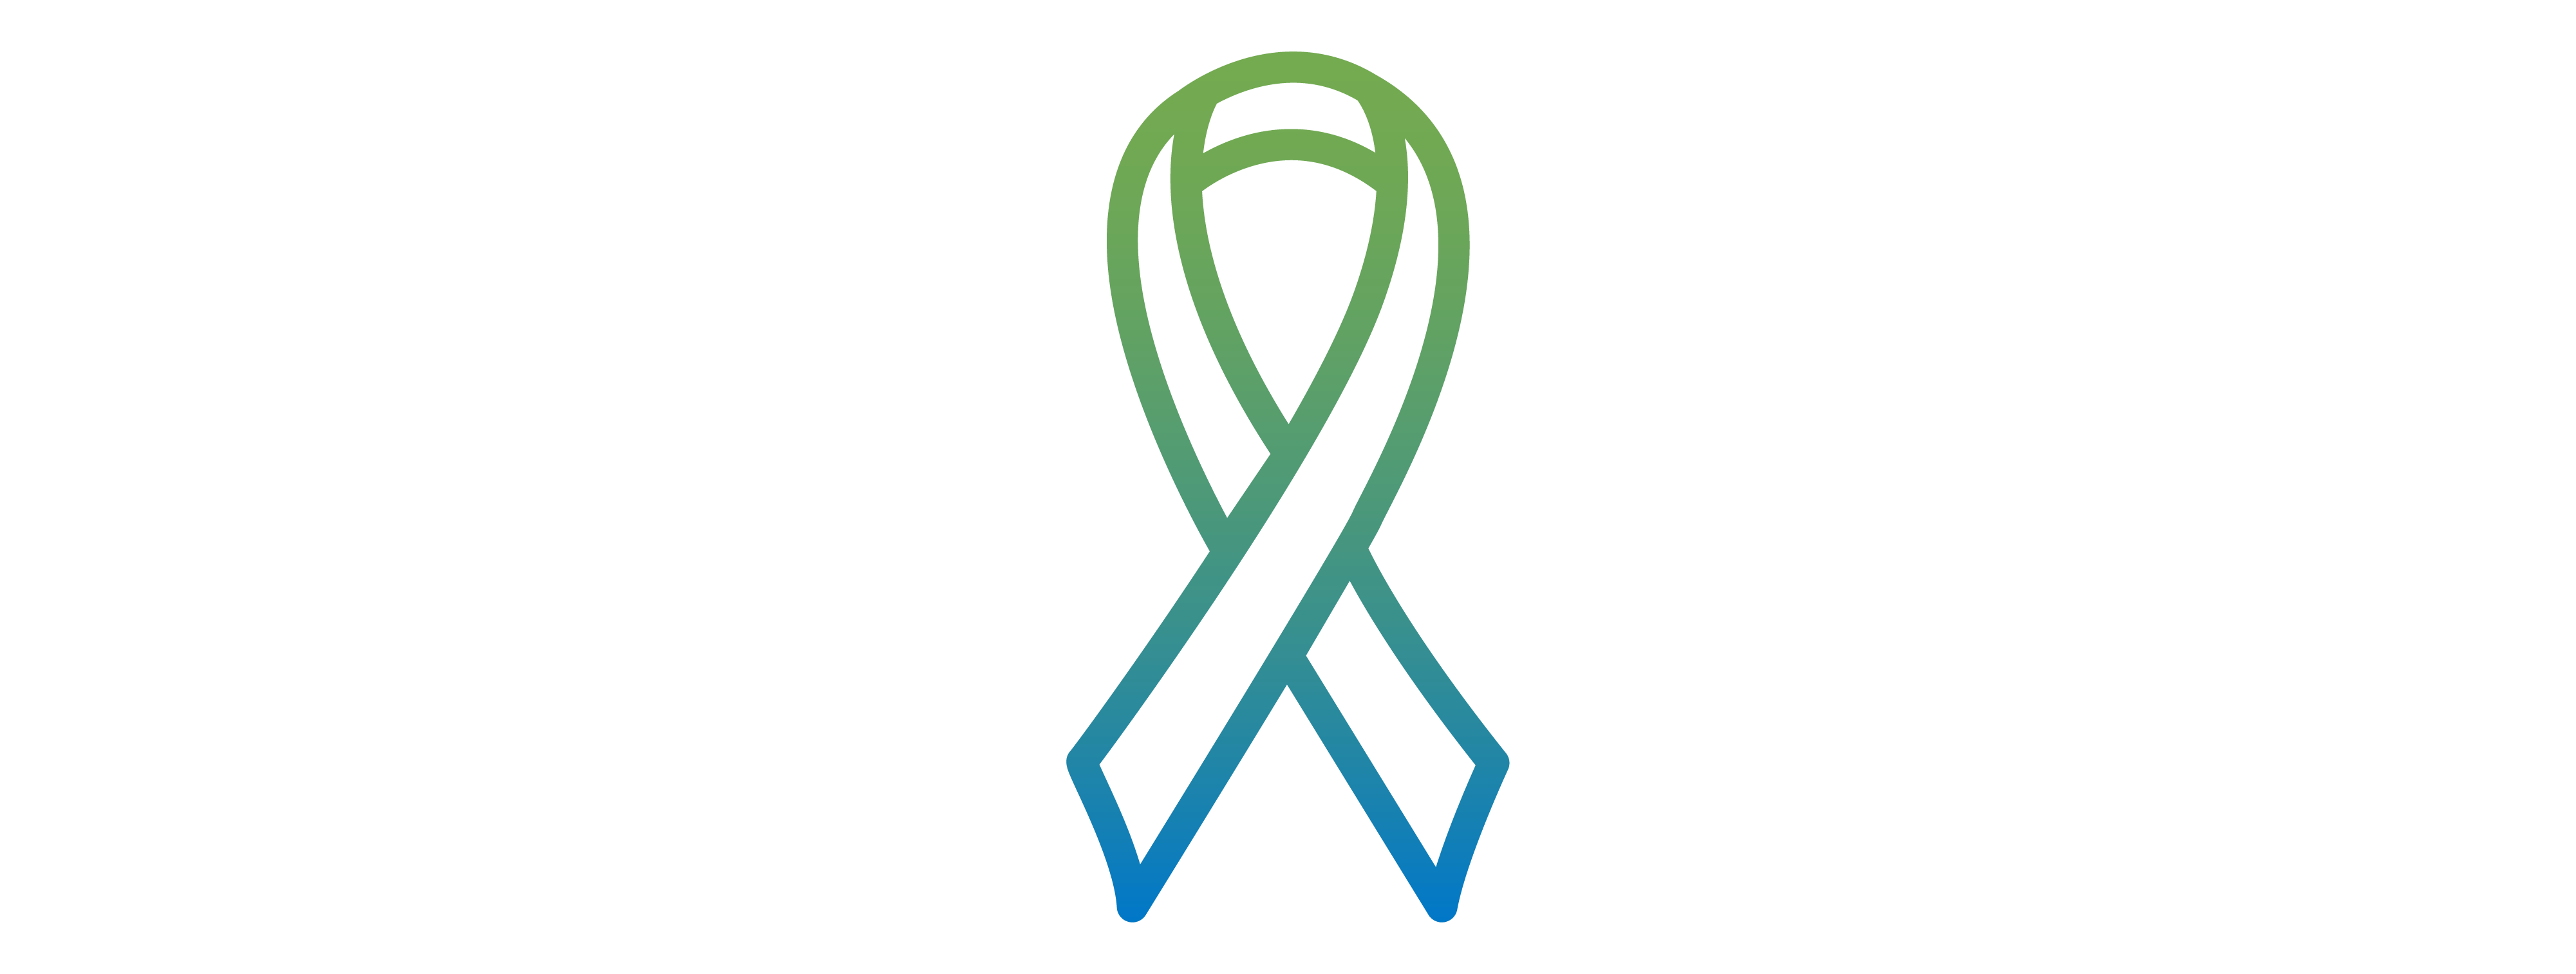 cancer awareness ribbon icon for oncology